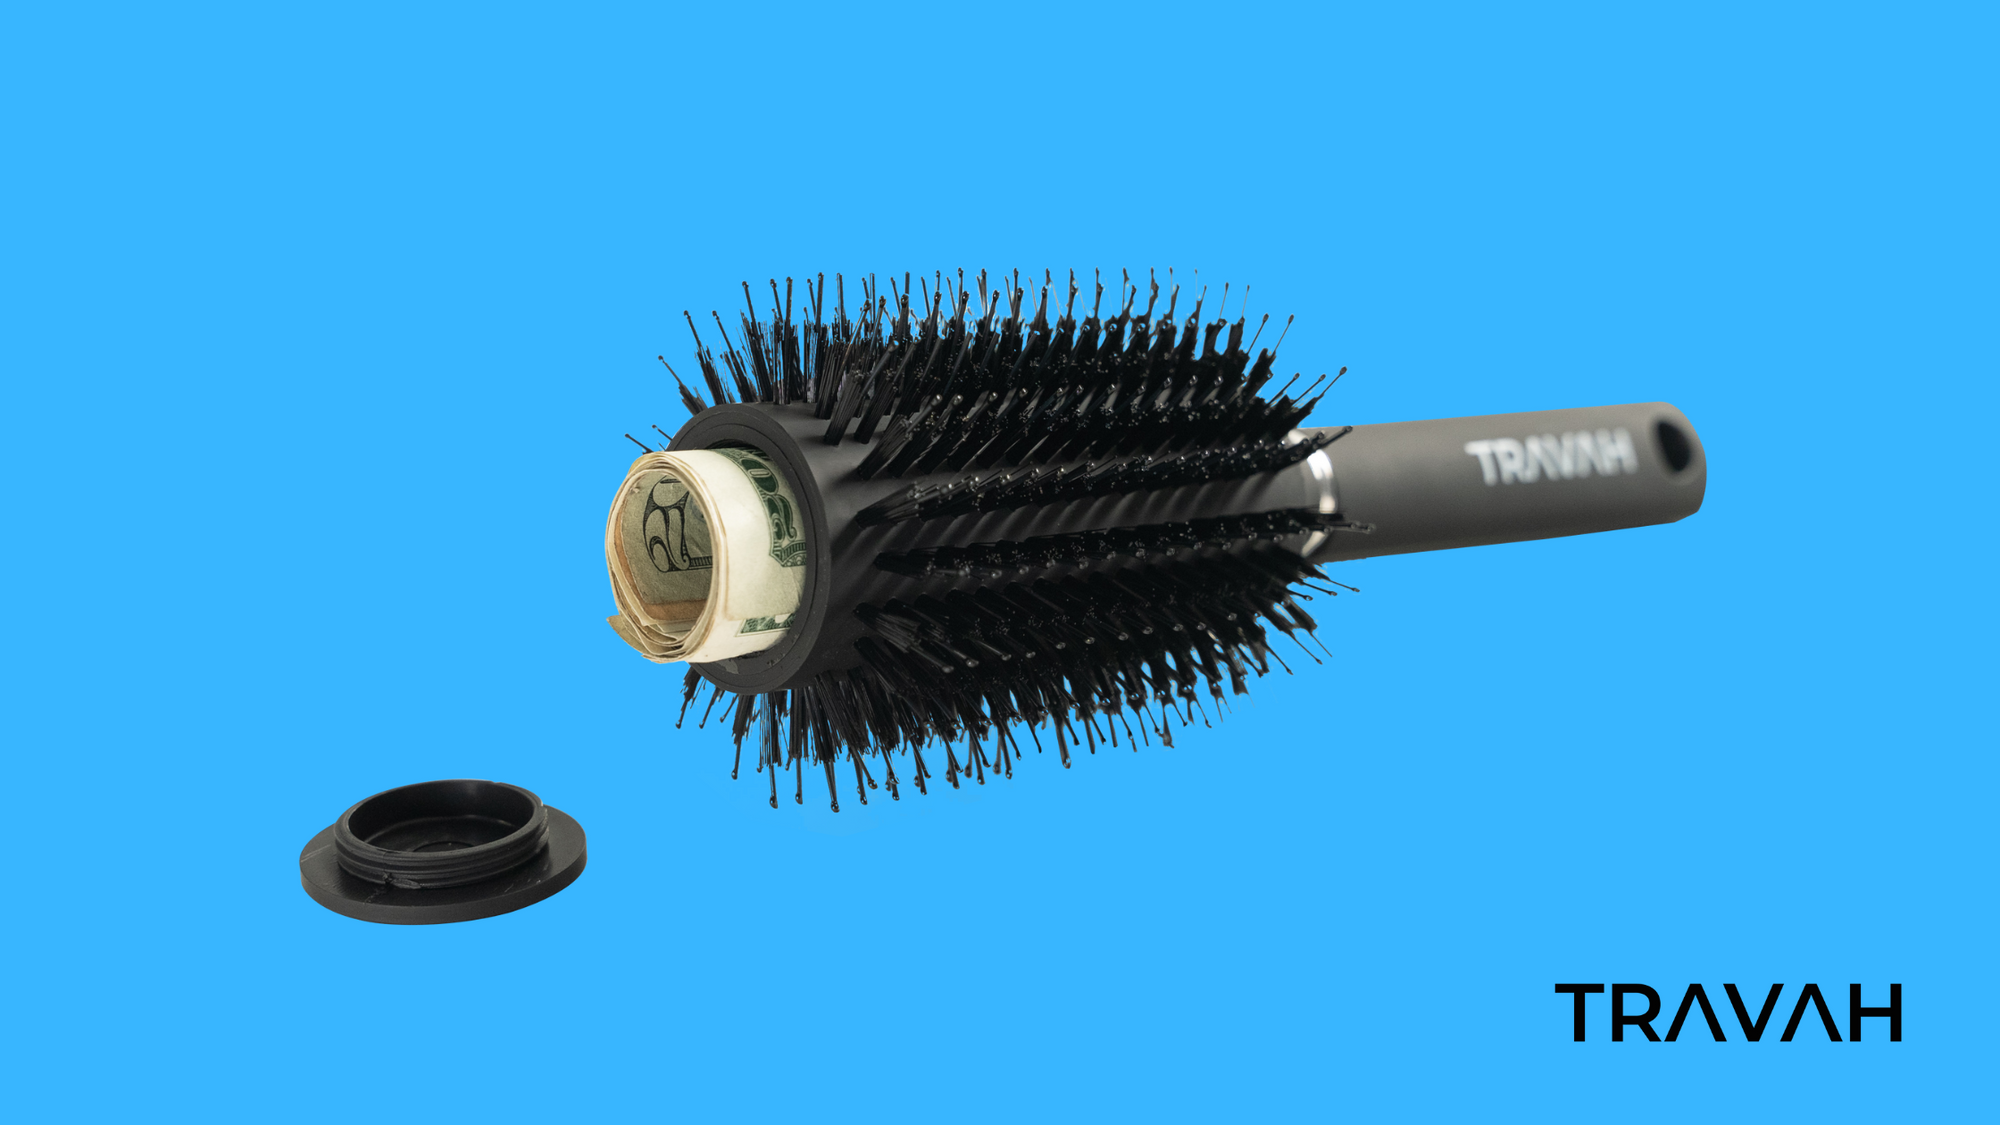 Travah Diversion Brush where you can store some items for security and safety